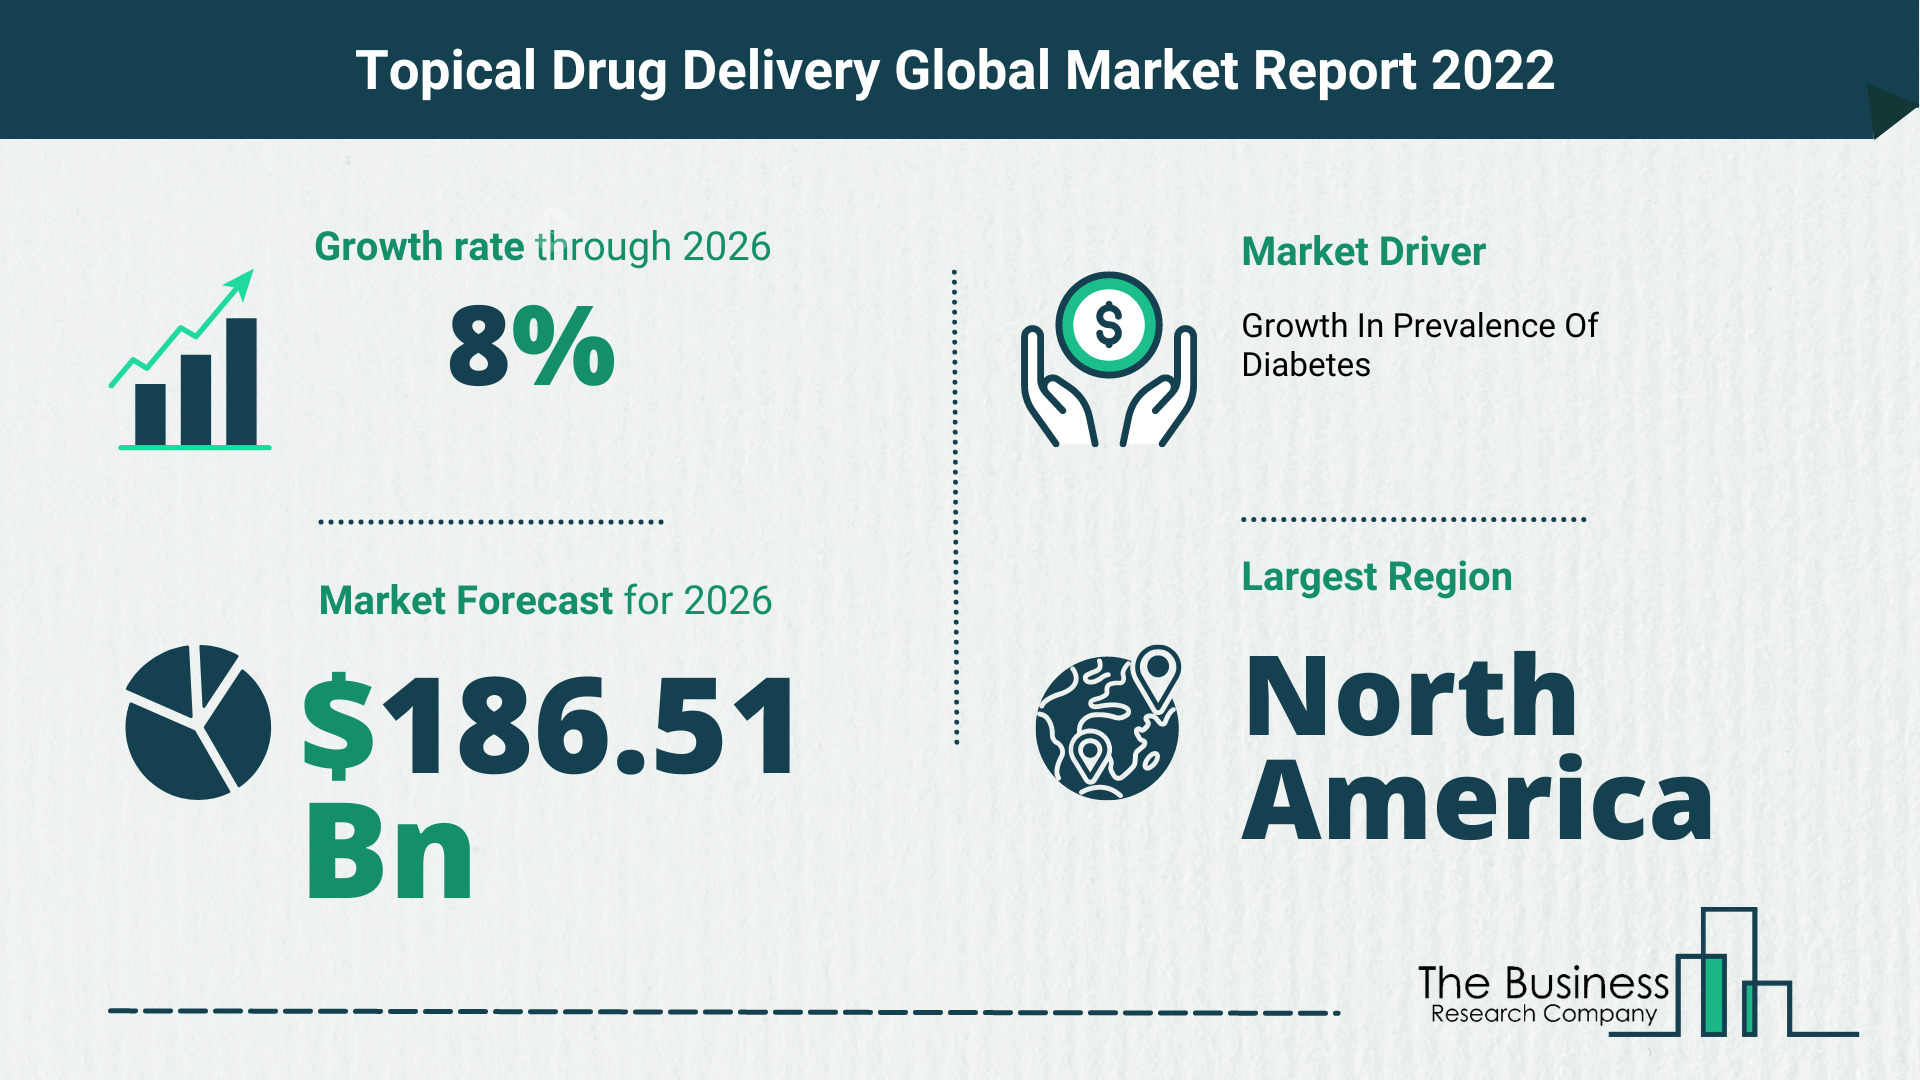 How Will The Topical Drug Delivery Market Grow In 2022?